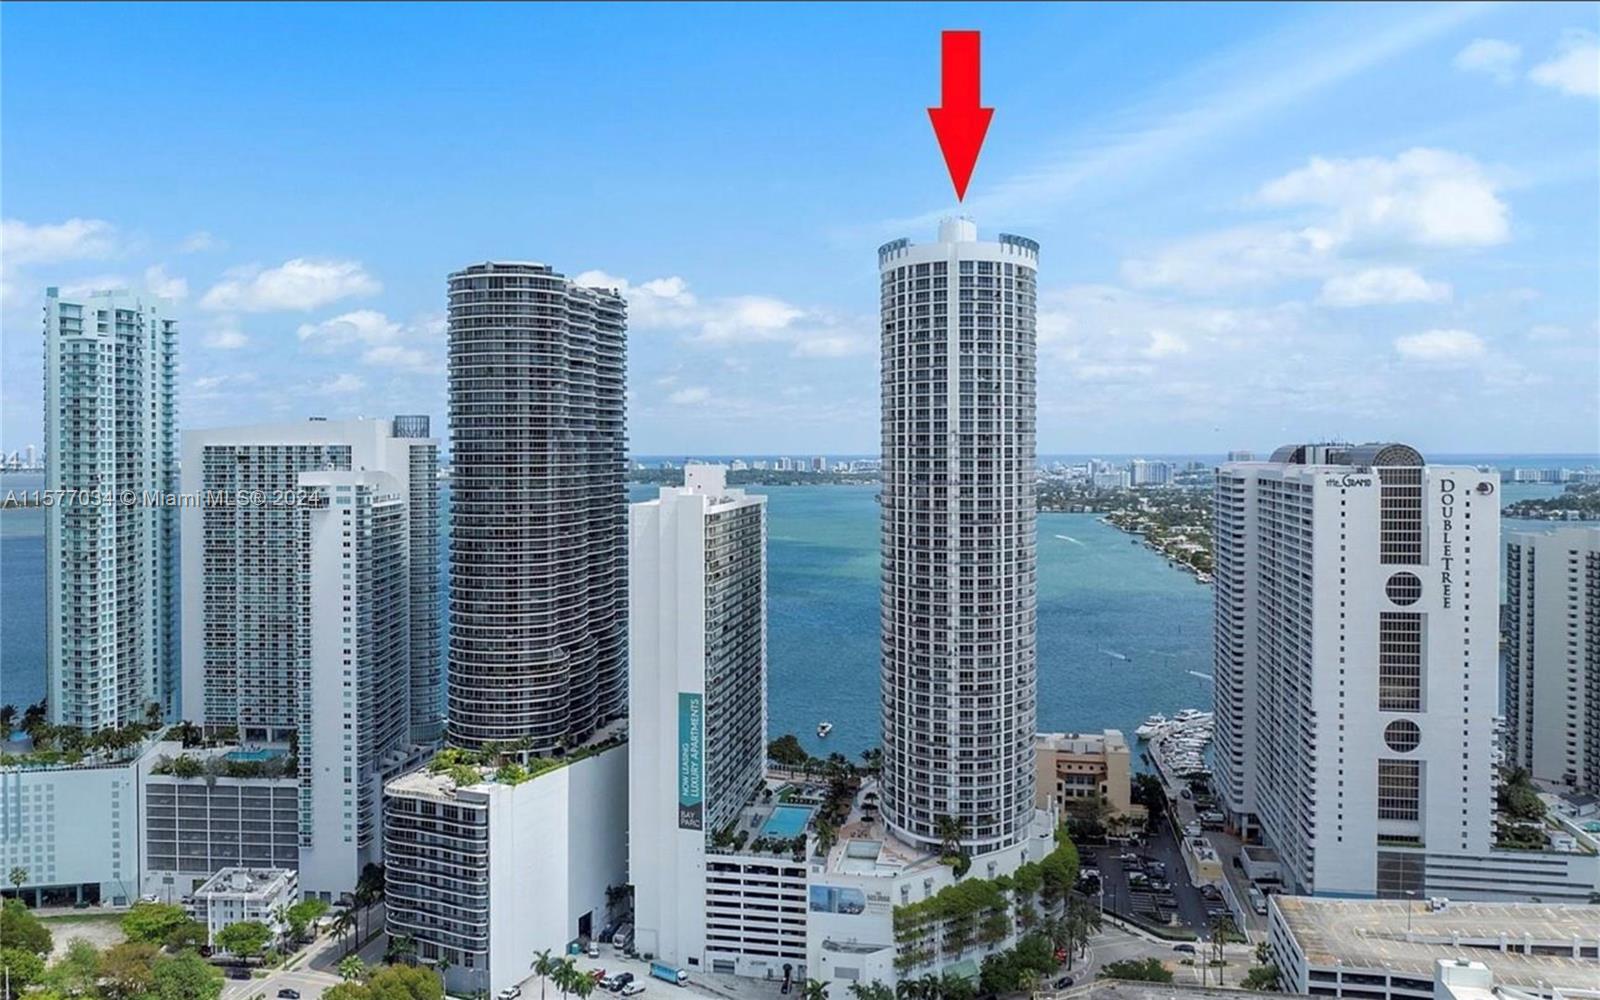 Live surrounded by art in this stylish Furnished 1 bedroom apartment in Edgewater, by Miami's Arts & Entertainment District. This bright & spacious apartment features a large balcony, fully equipped kitchen, ceramic flooring, and wood floor in the bedroom. AC, ceiling fan, washer & dryer in unit. One parking space, basic cable, wifi and water included in the rent. Building amenities include a pool, gym, clubroom, lobby convenience store, and valet. Live across the street from Margaret Pace Park, a bayside park with many amenities including tennis & basketball courts, beach volleyball, playground, picnic area & more. Easy access to Downtown, Brickell, Venetian Causeway, Wynwood, Design District. Minimum 3 months lease, Furnished only. Rent includes basic cable, wifi, water, trash.